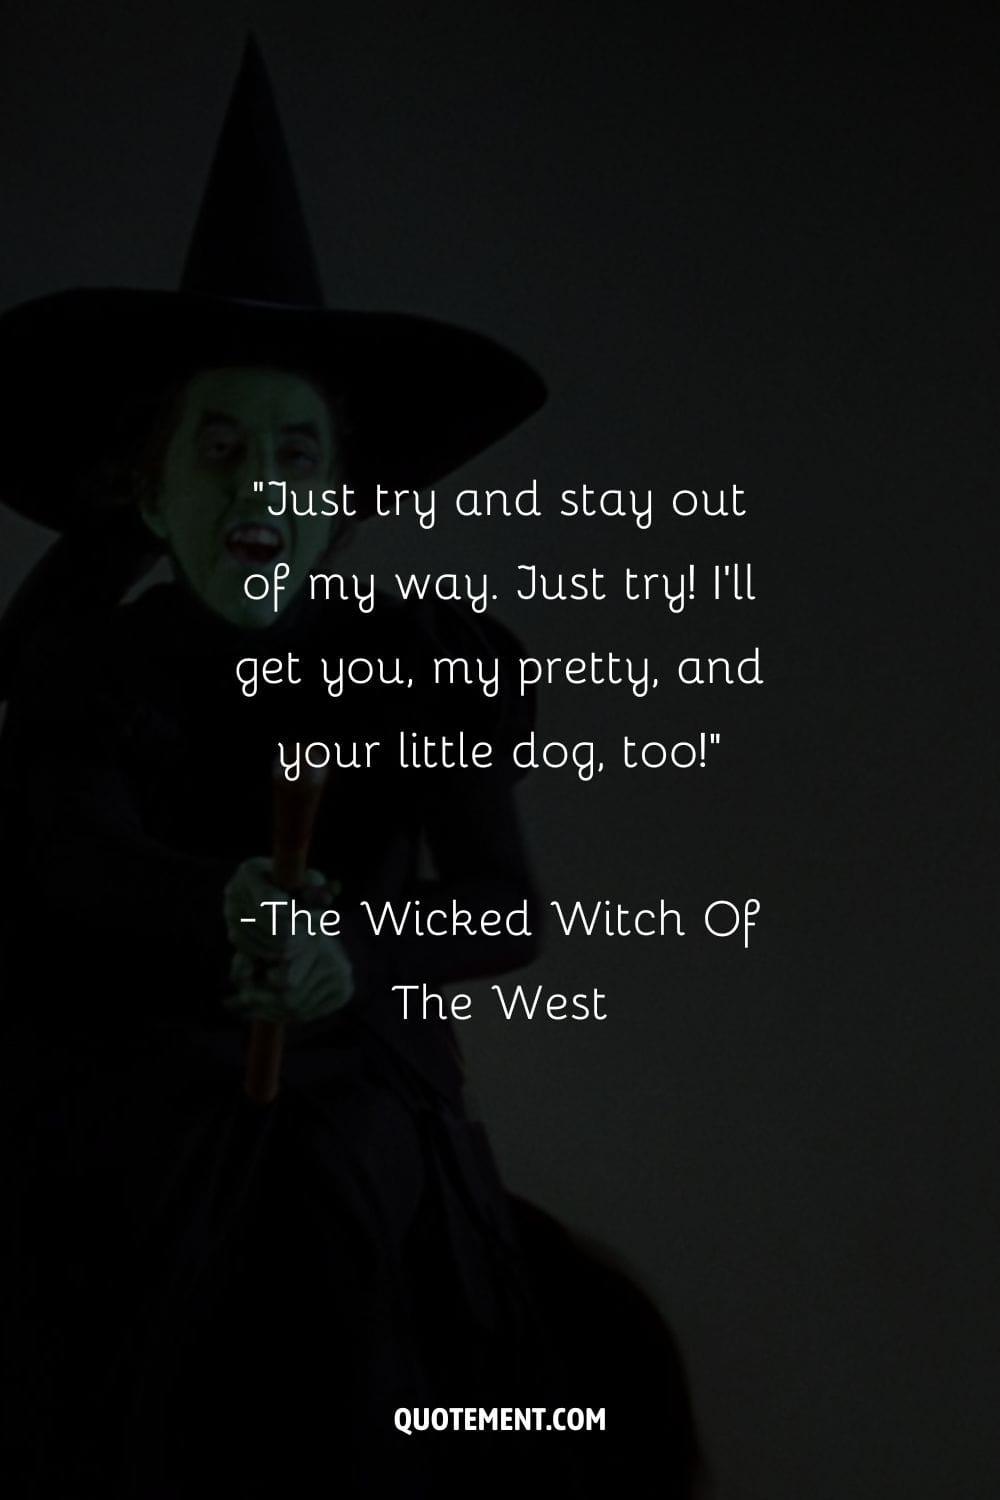 The Wicked Witch Of The West on her broom
